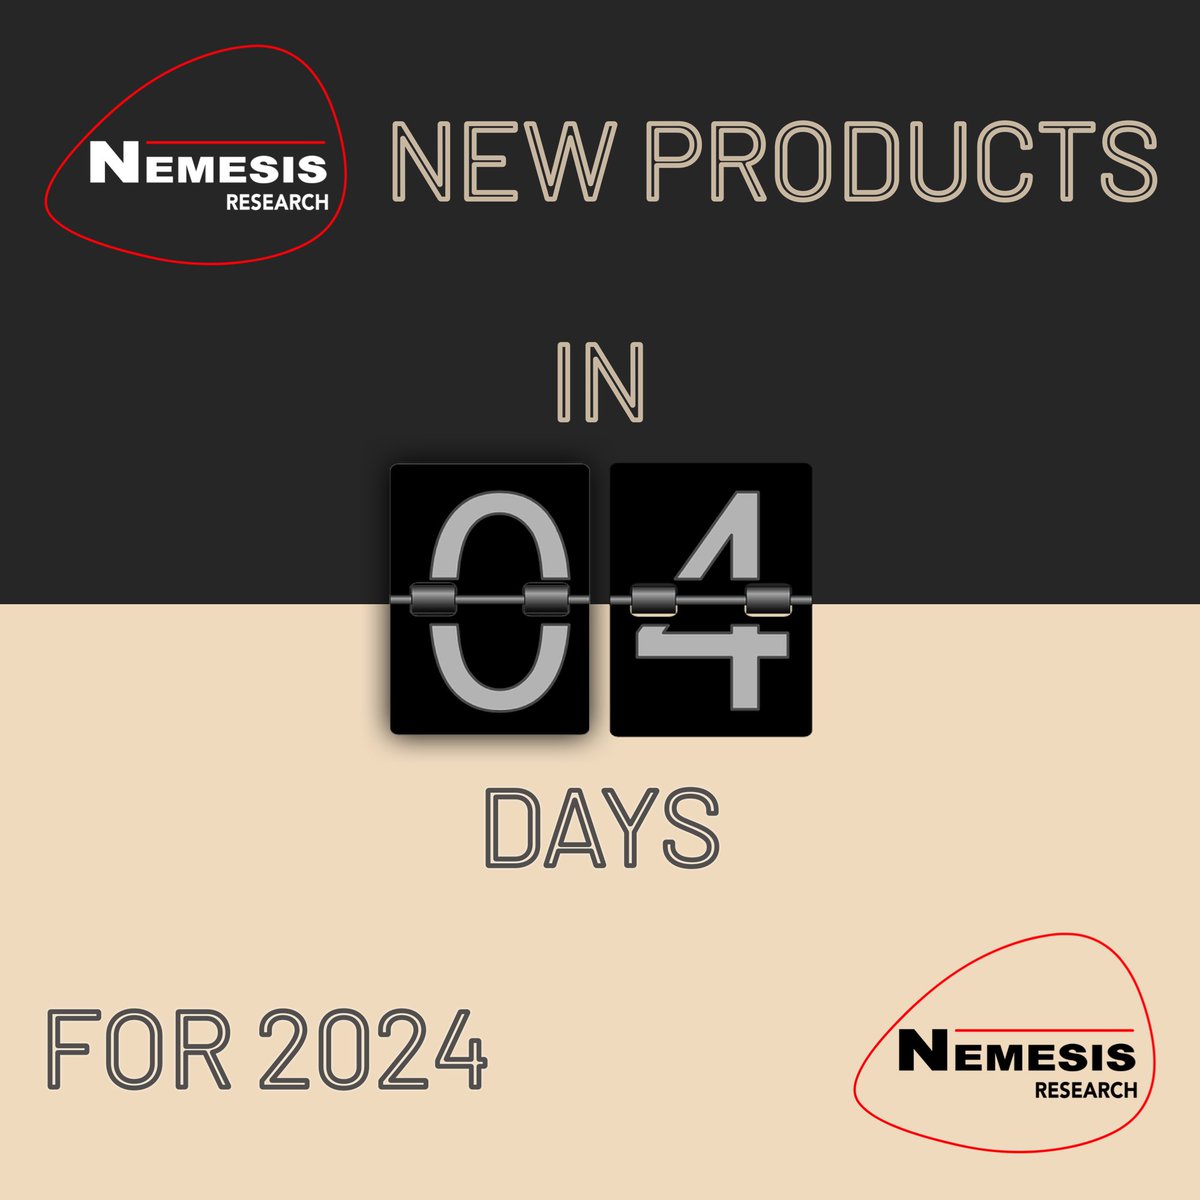 The Nemesis Research team have been busy behind the scenes… Get ready for a whole host of updates, upgrades and new products – not long now folks! #NemesisResearch #ShowControl #ProductionTools #BackupSolutions